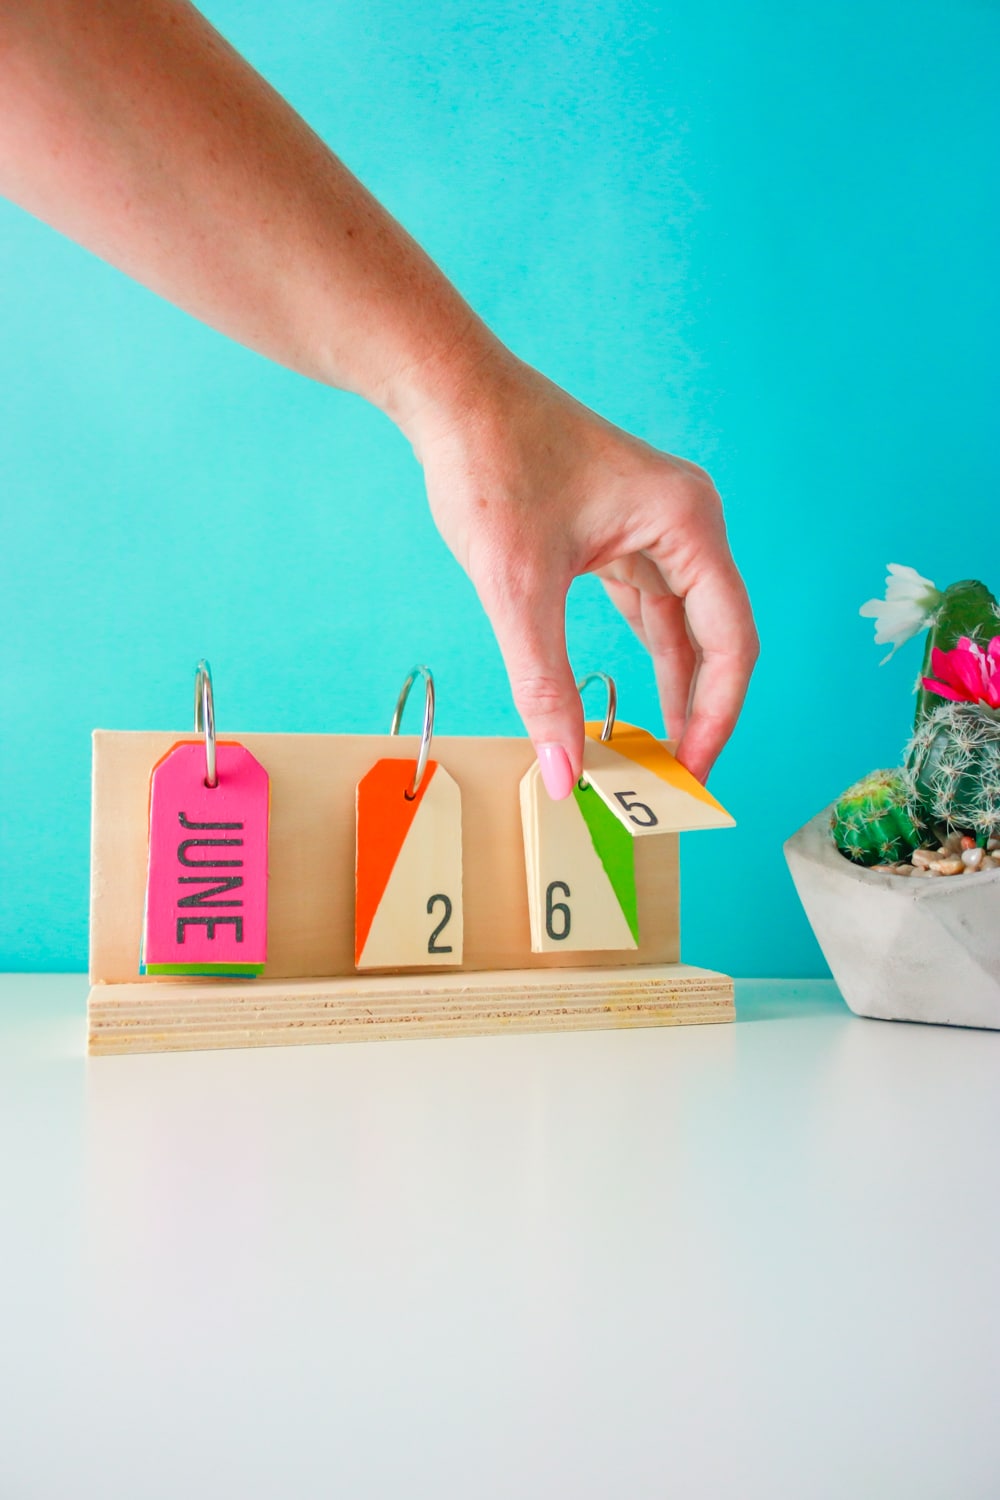 How to make a perpetual calendar for a colorful way to display the date! You'll need wood pieces, wooden tags, glue, metal rings, paint, and a drill.